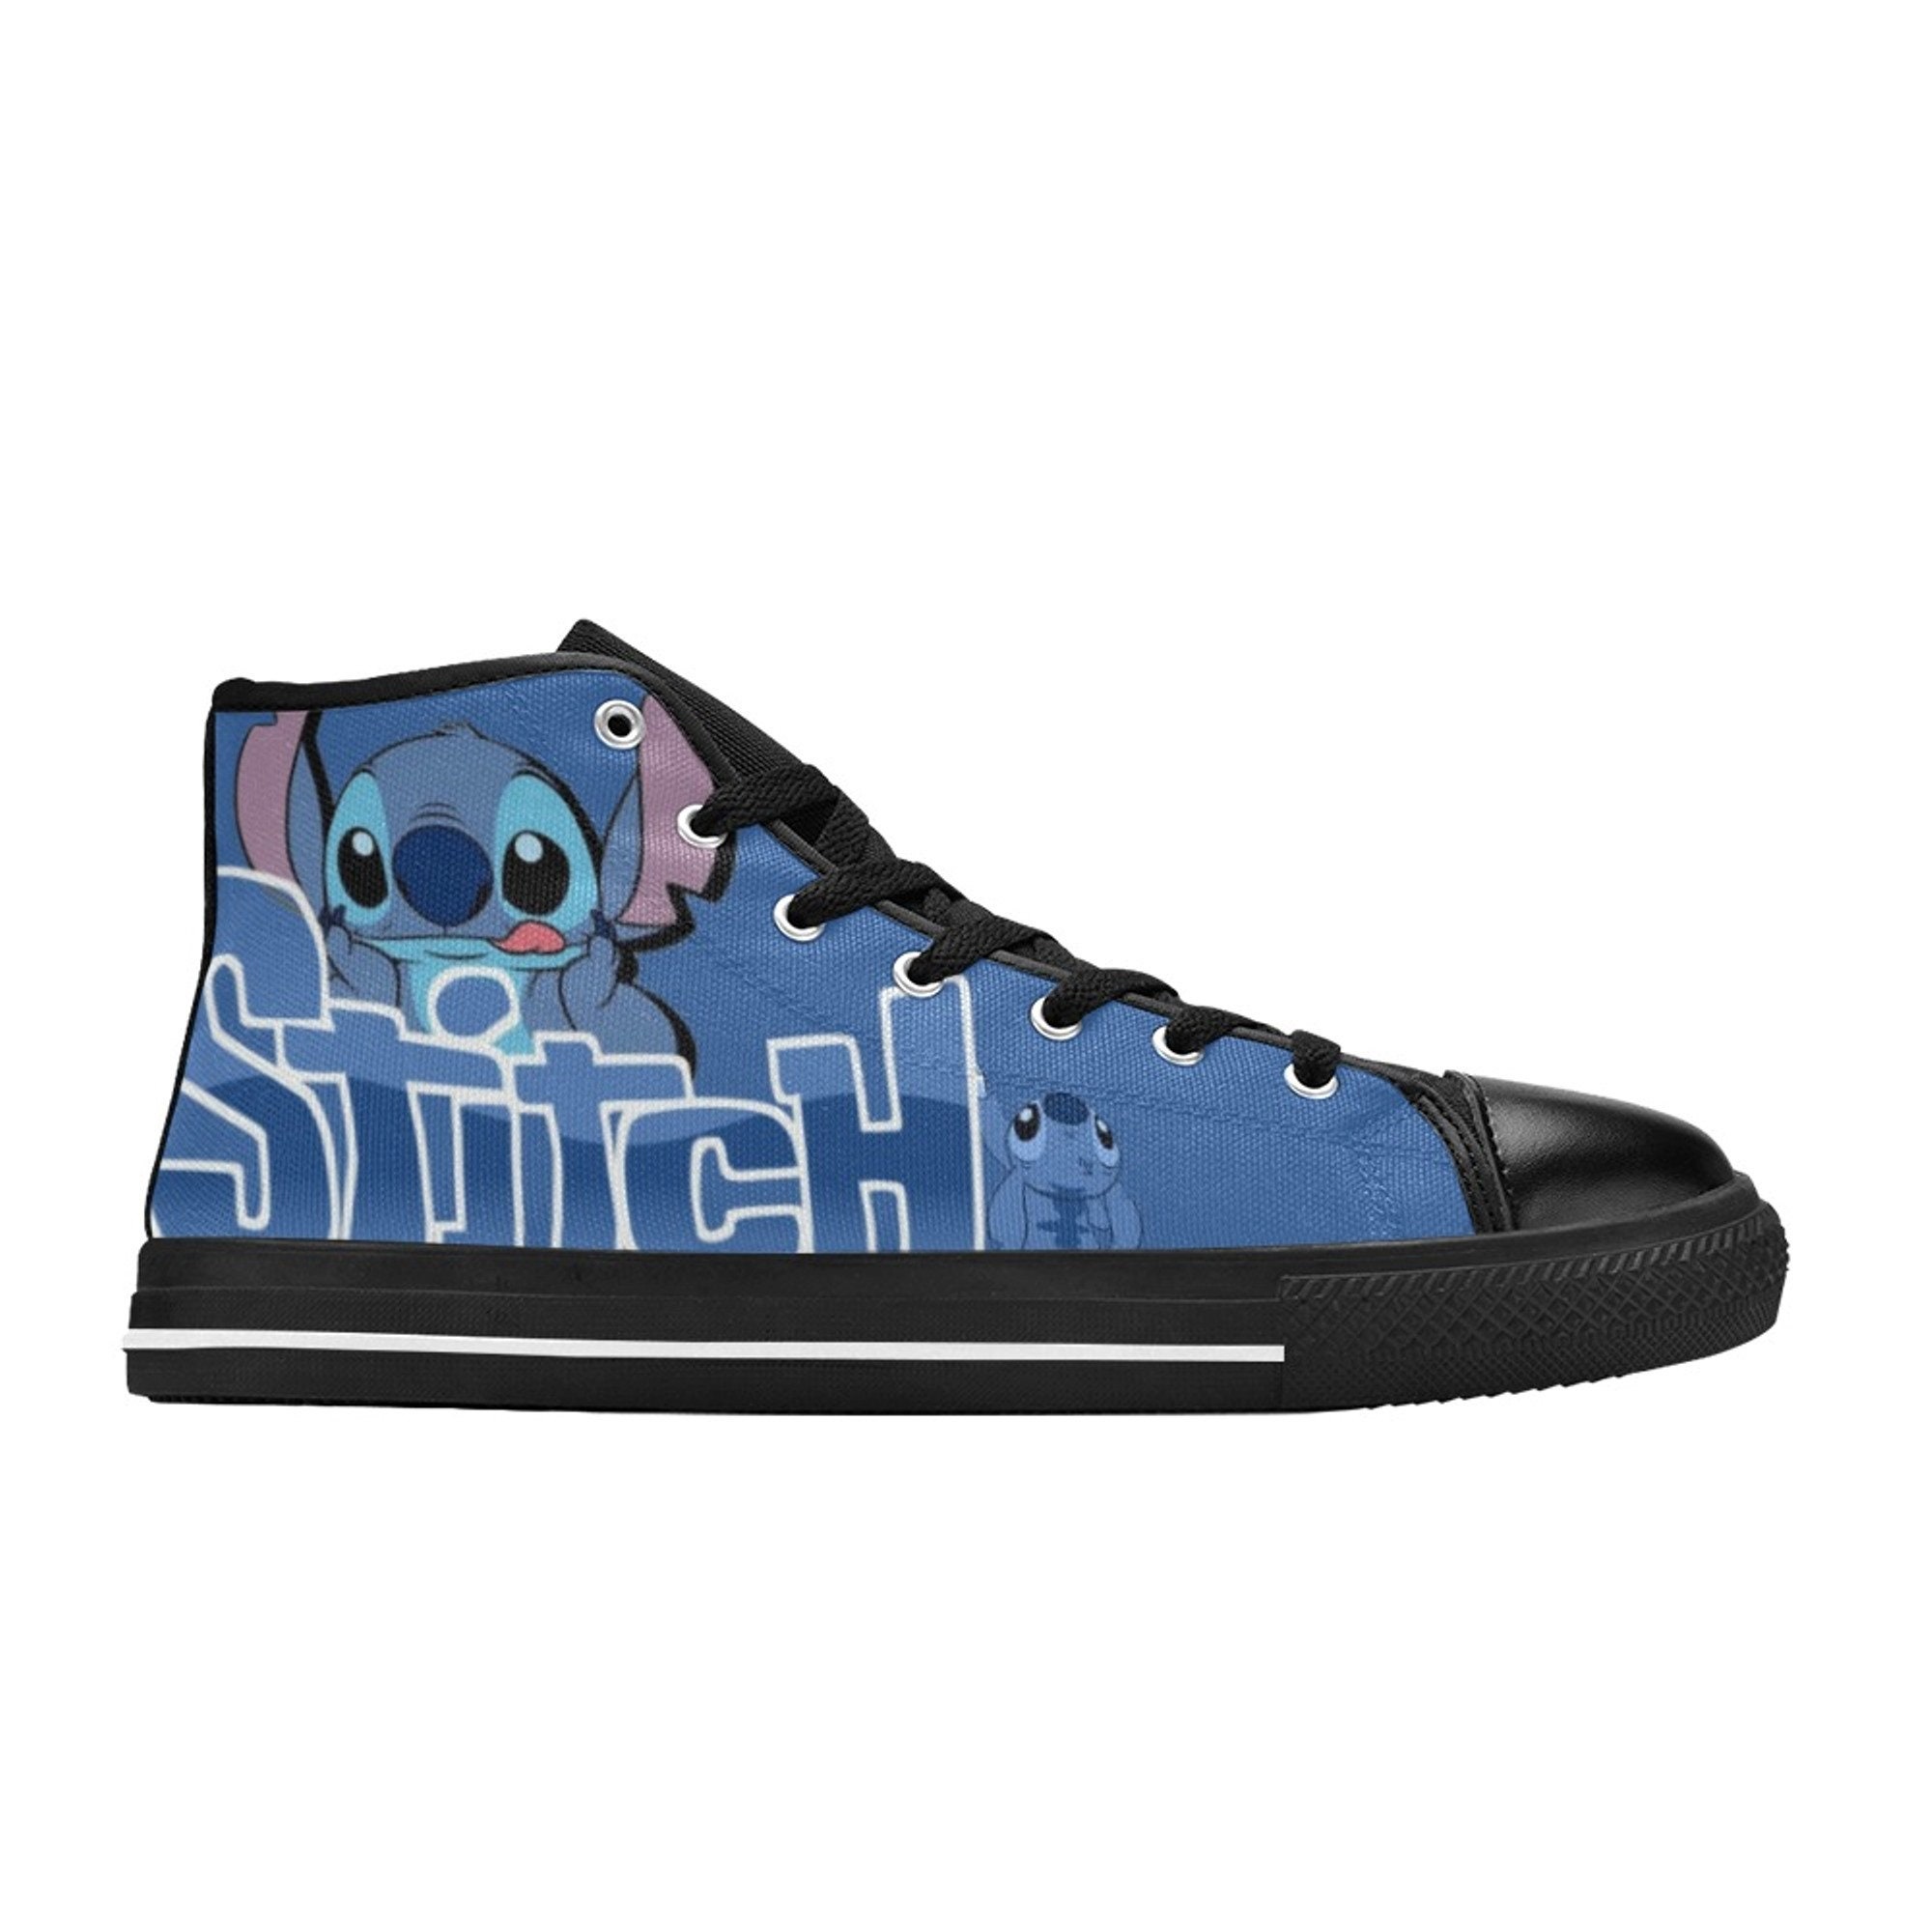 Discover Stitch Custom High Top Sneakers